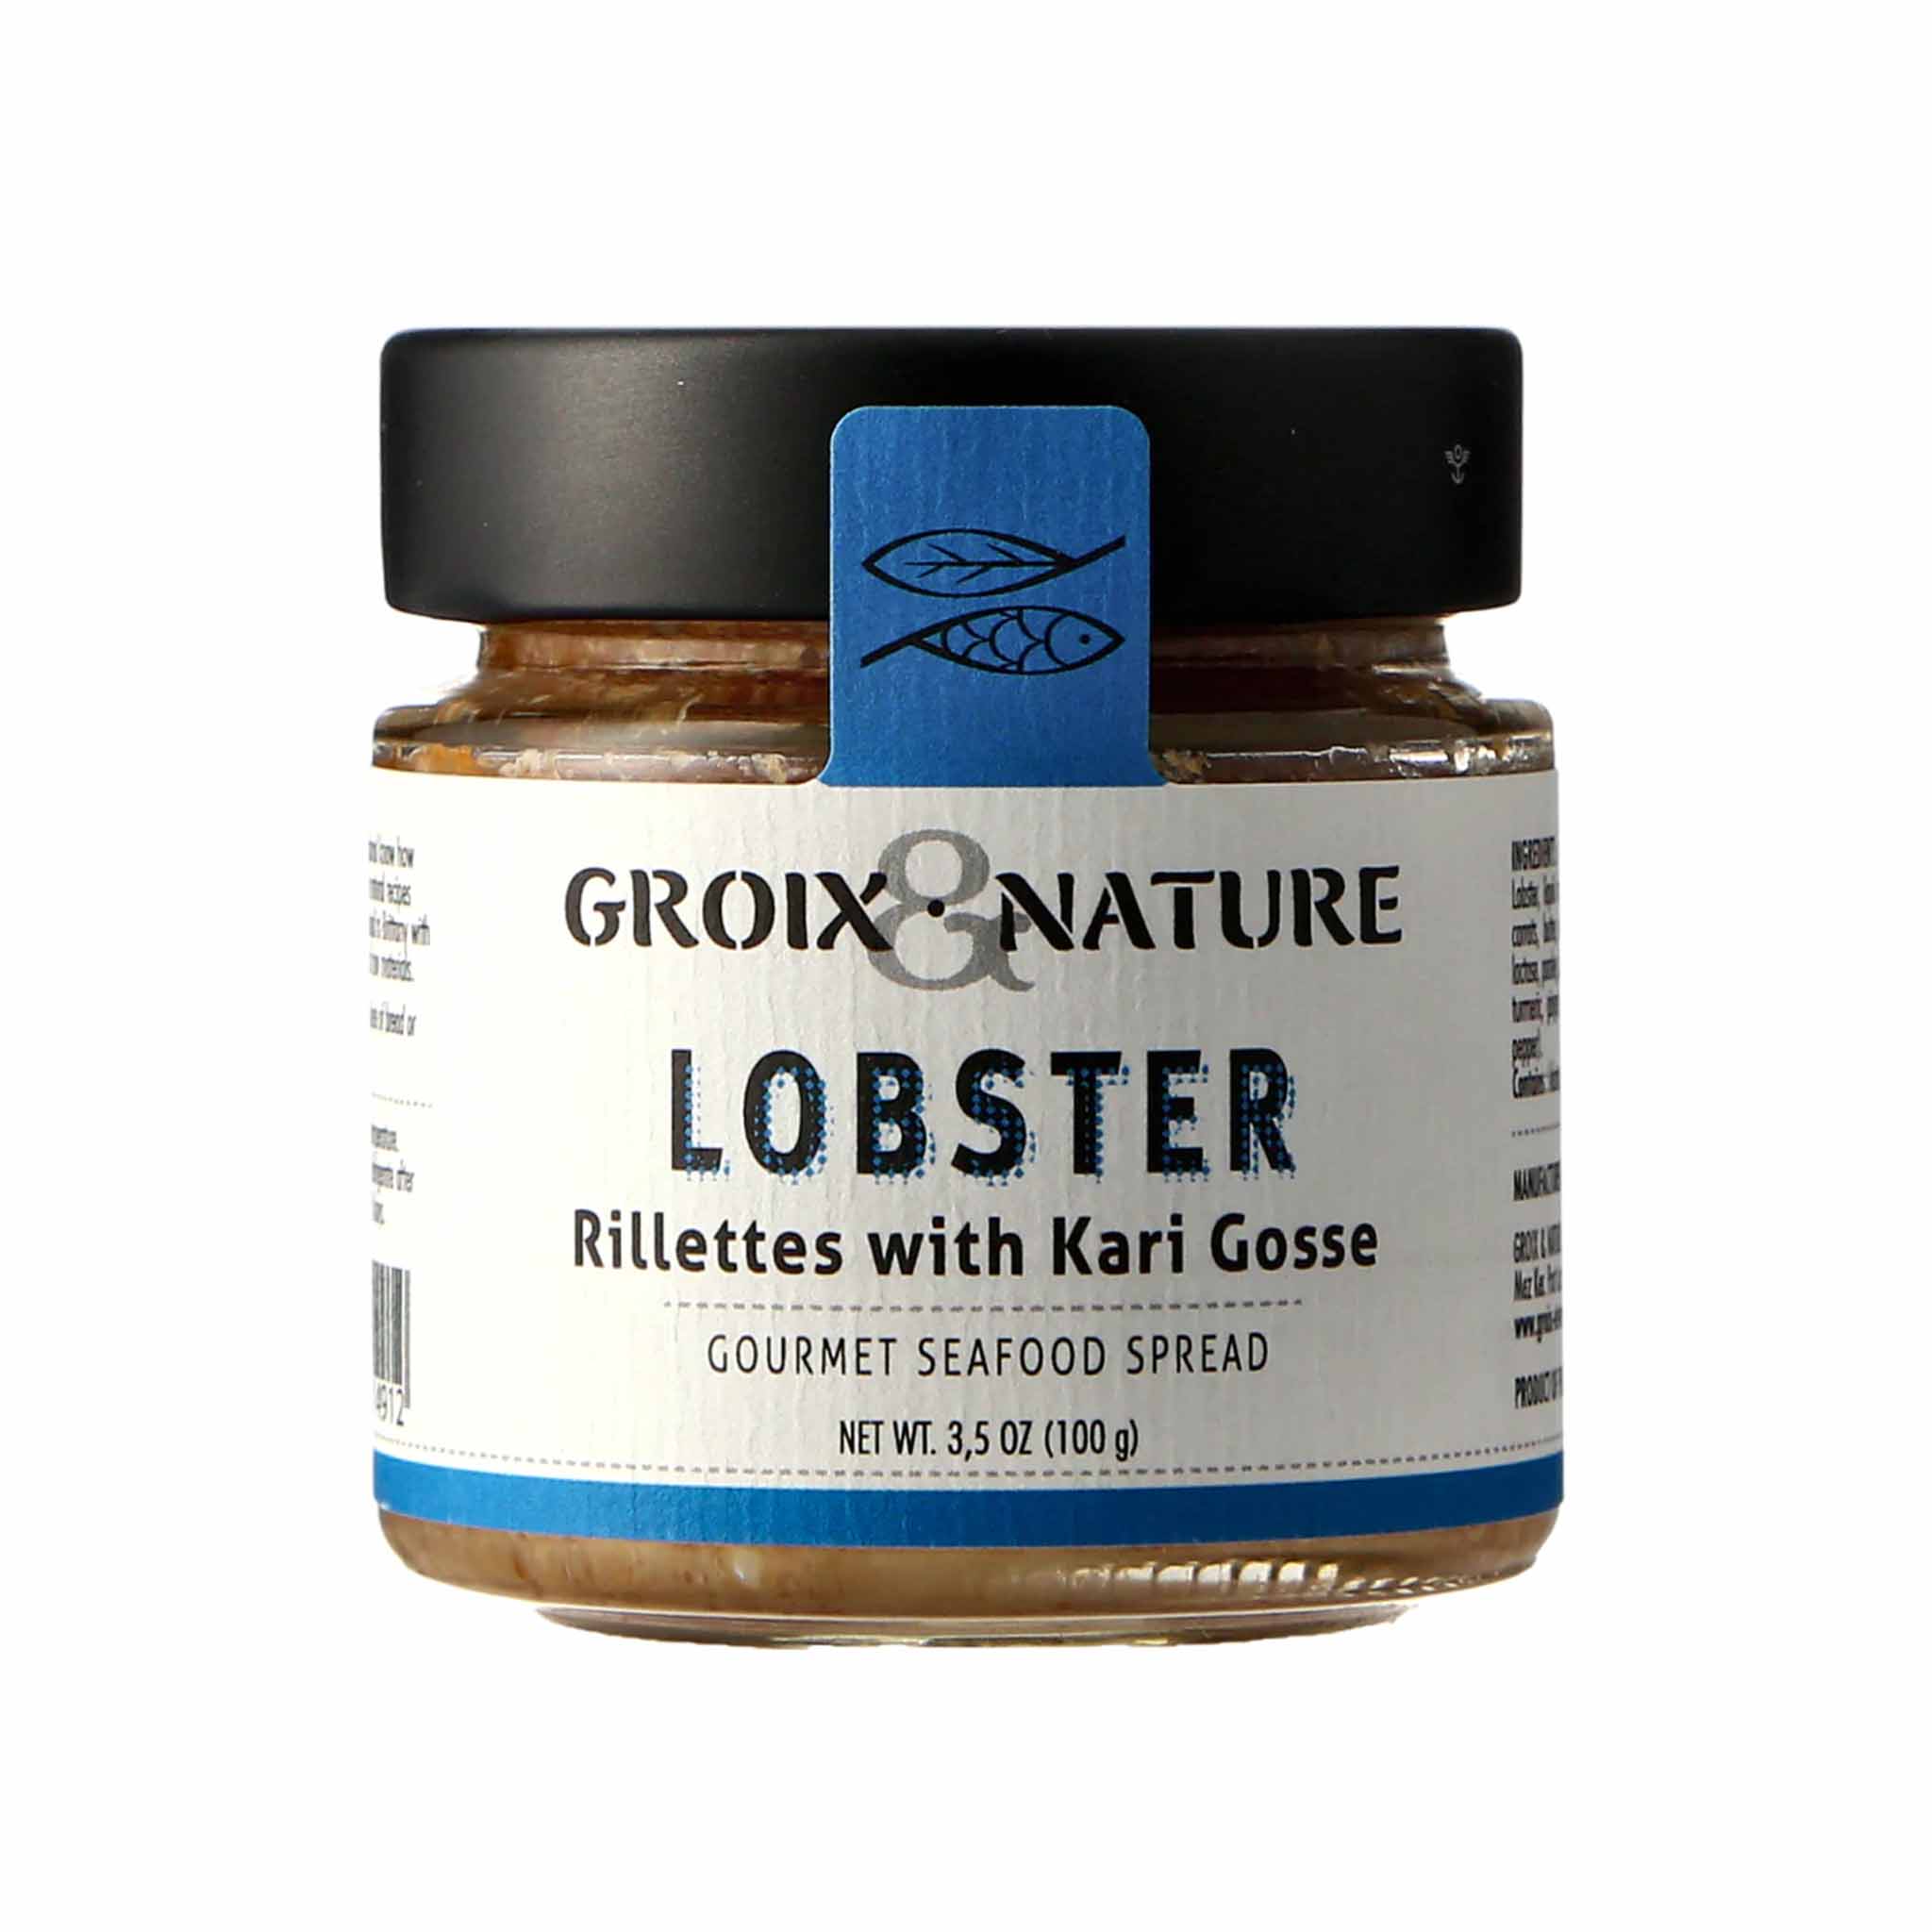 Groix & Nature Lobster Rillettes Gourmet Seafood Spread